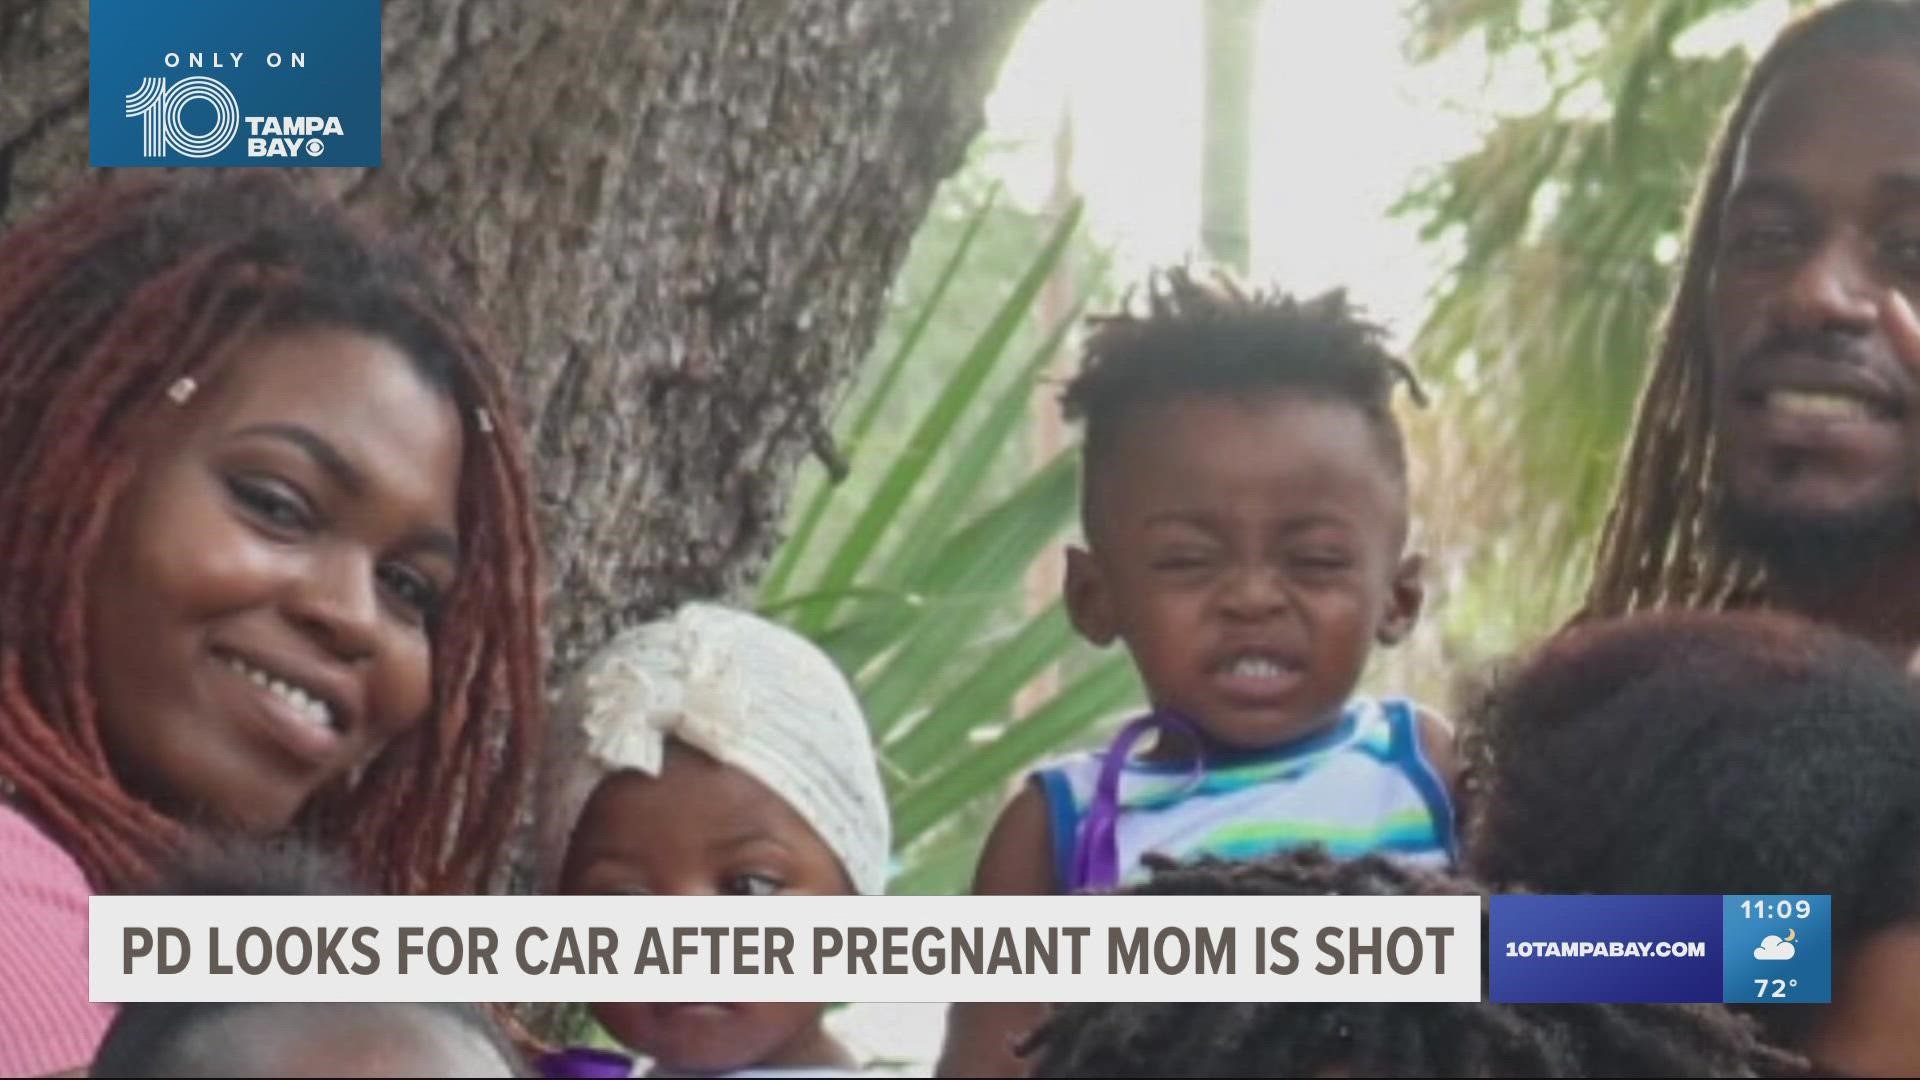 The homeless family of five was sleeping in their car in Tampa when another car pulled into the parking lot and started shooting, police say.